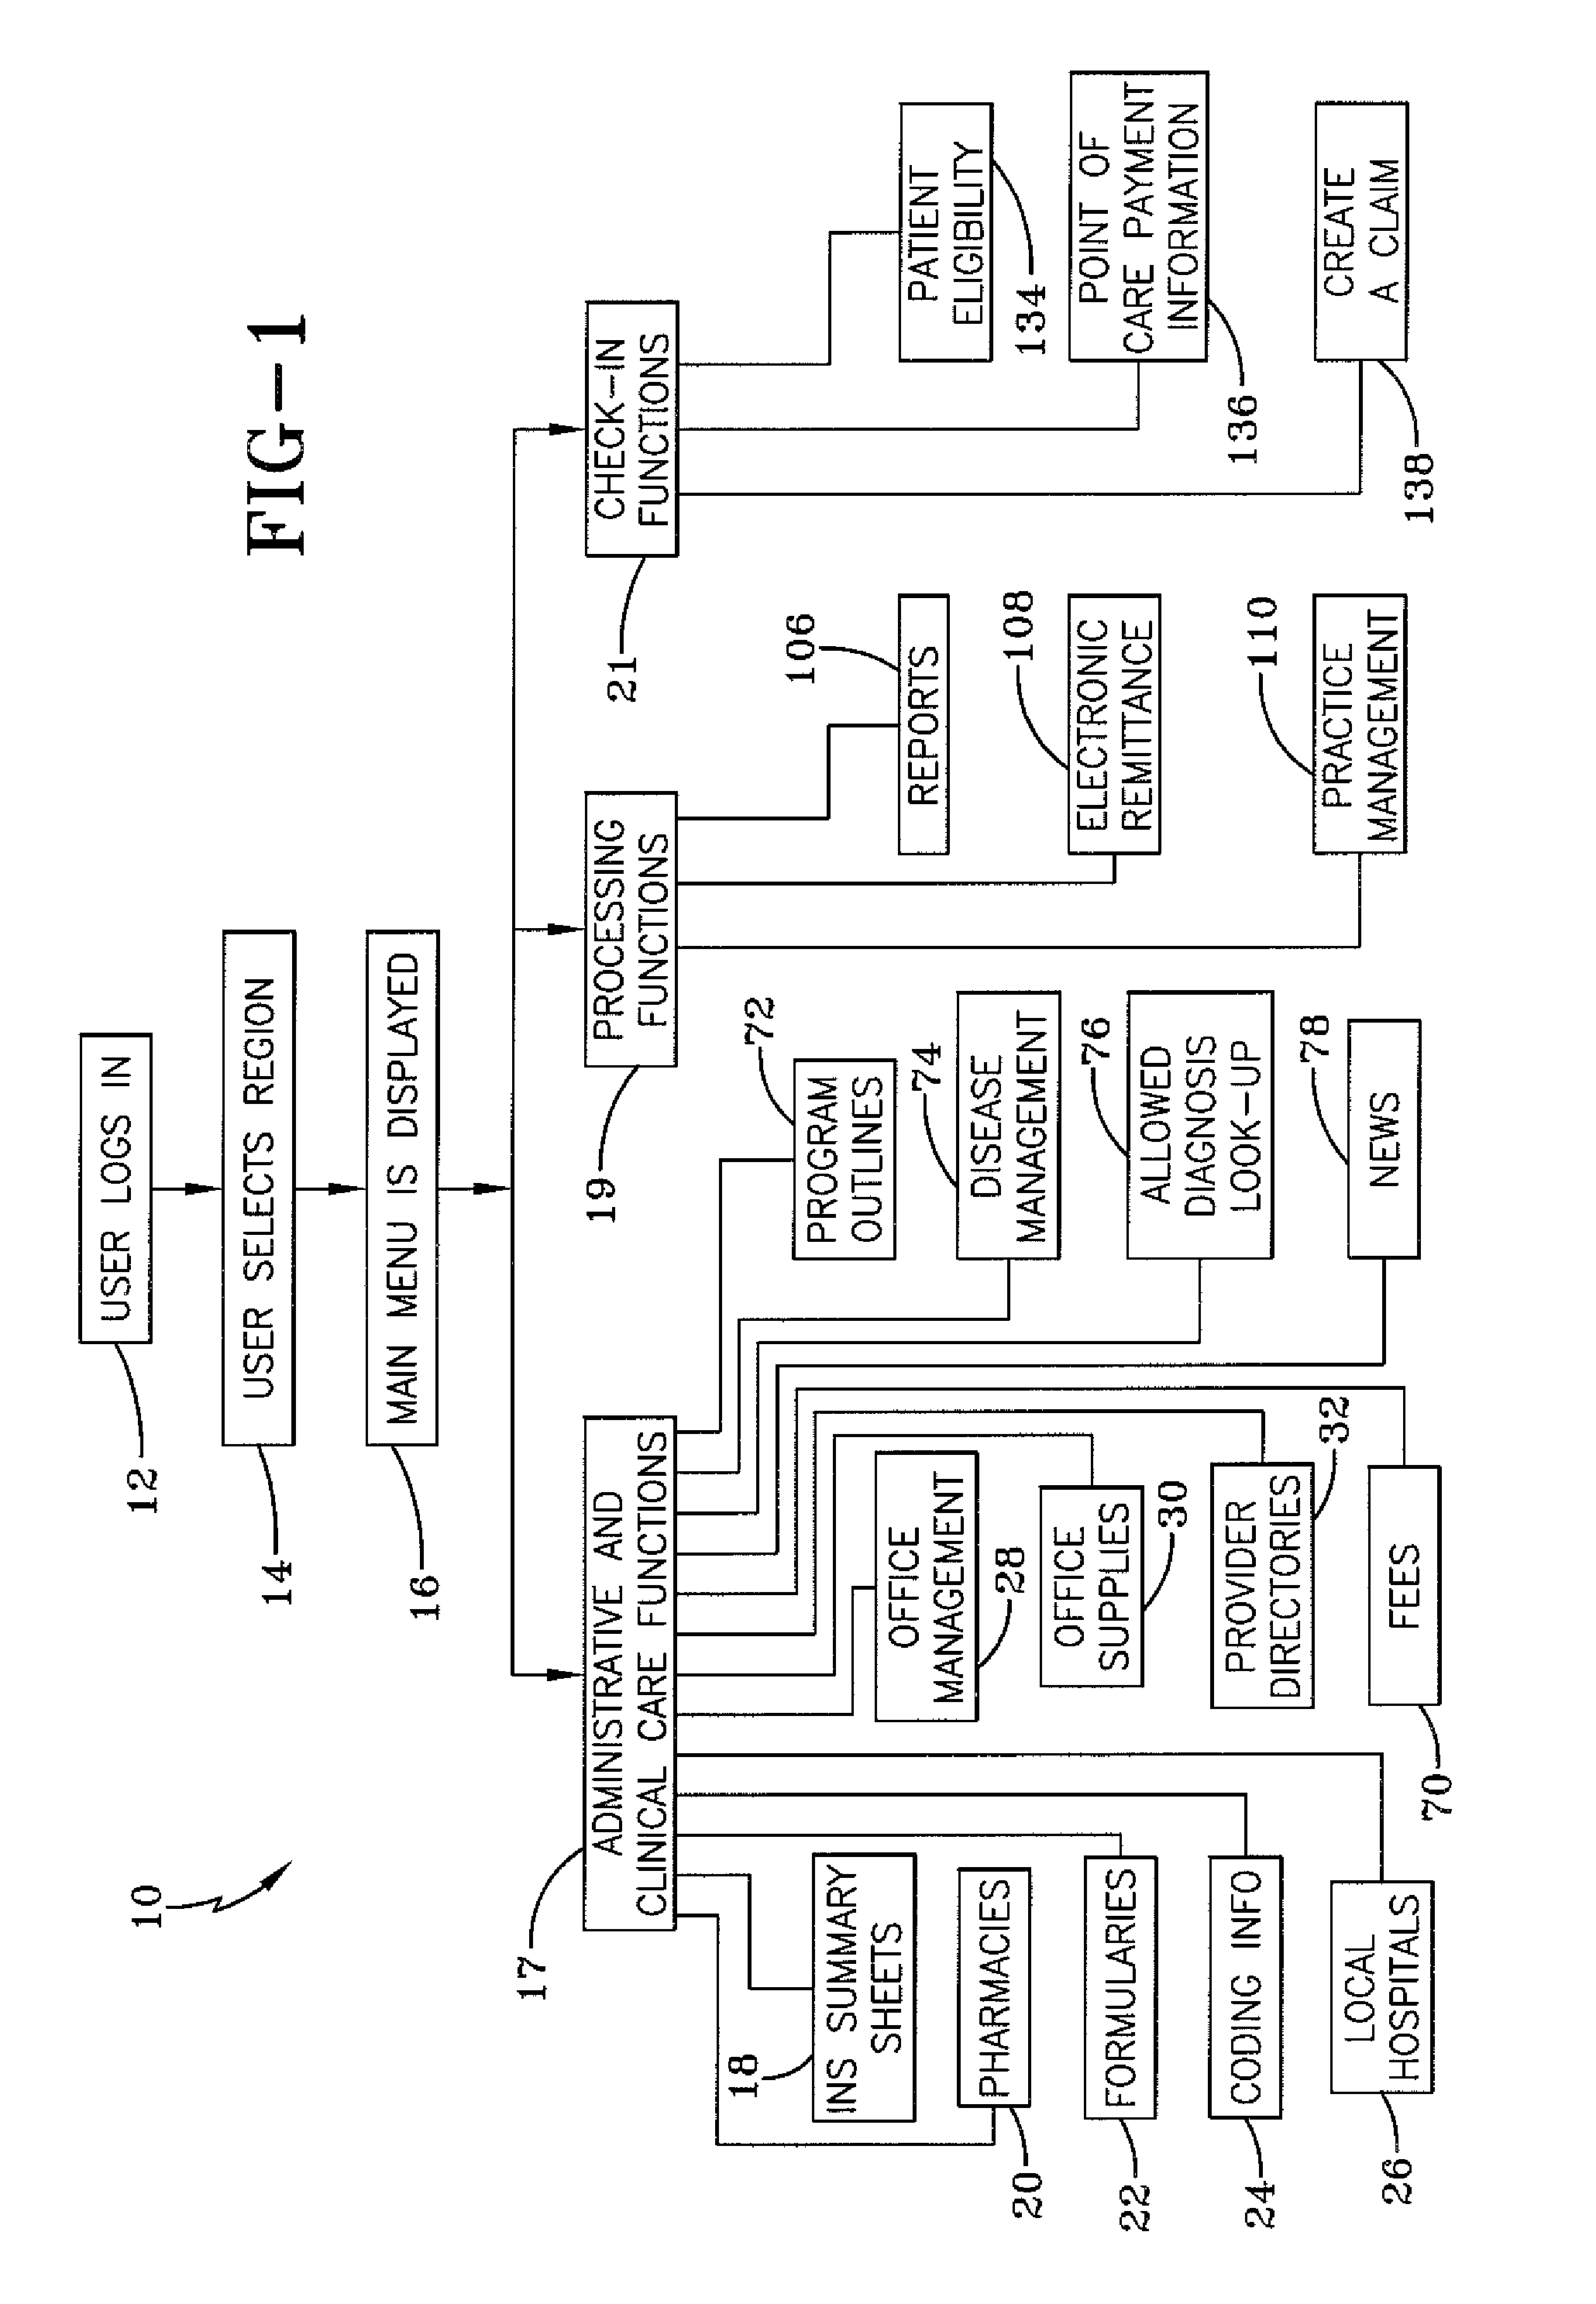 Method and apparatus for managing health care information